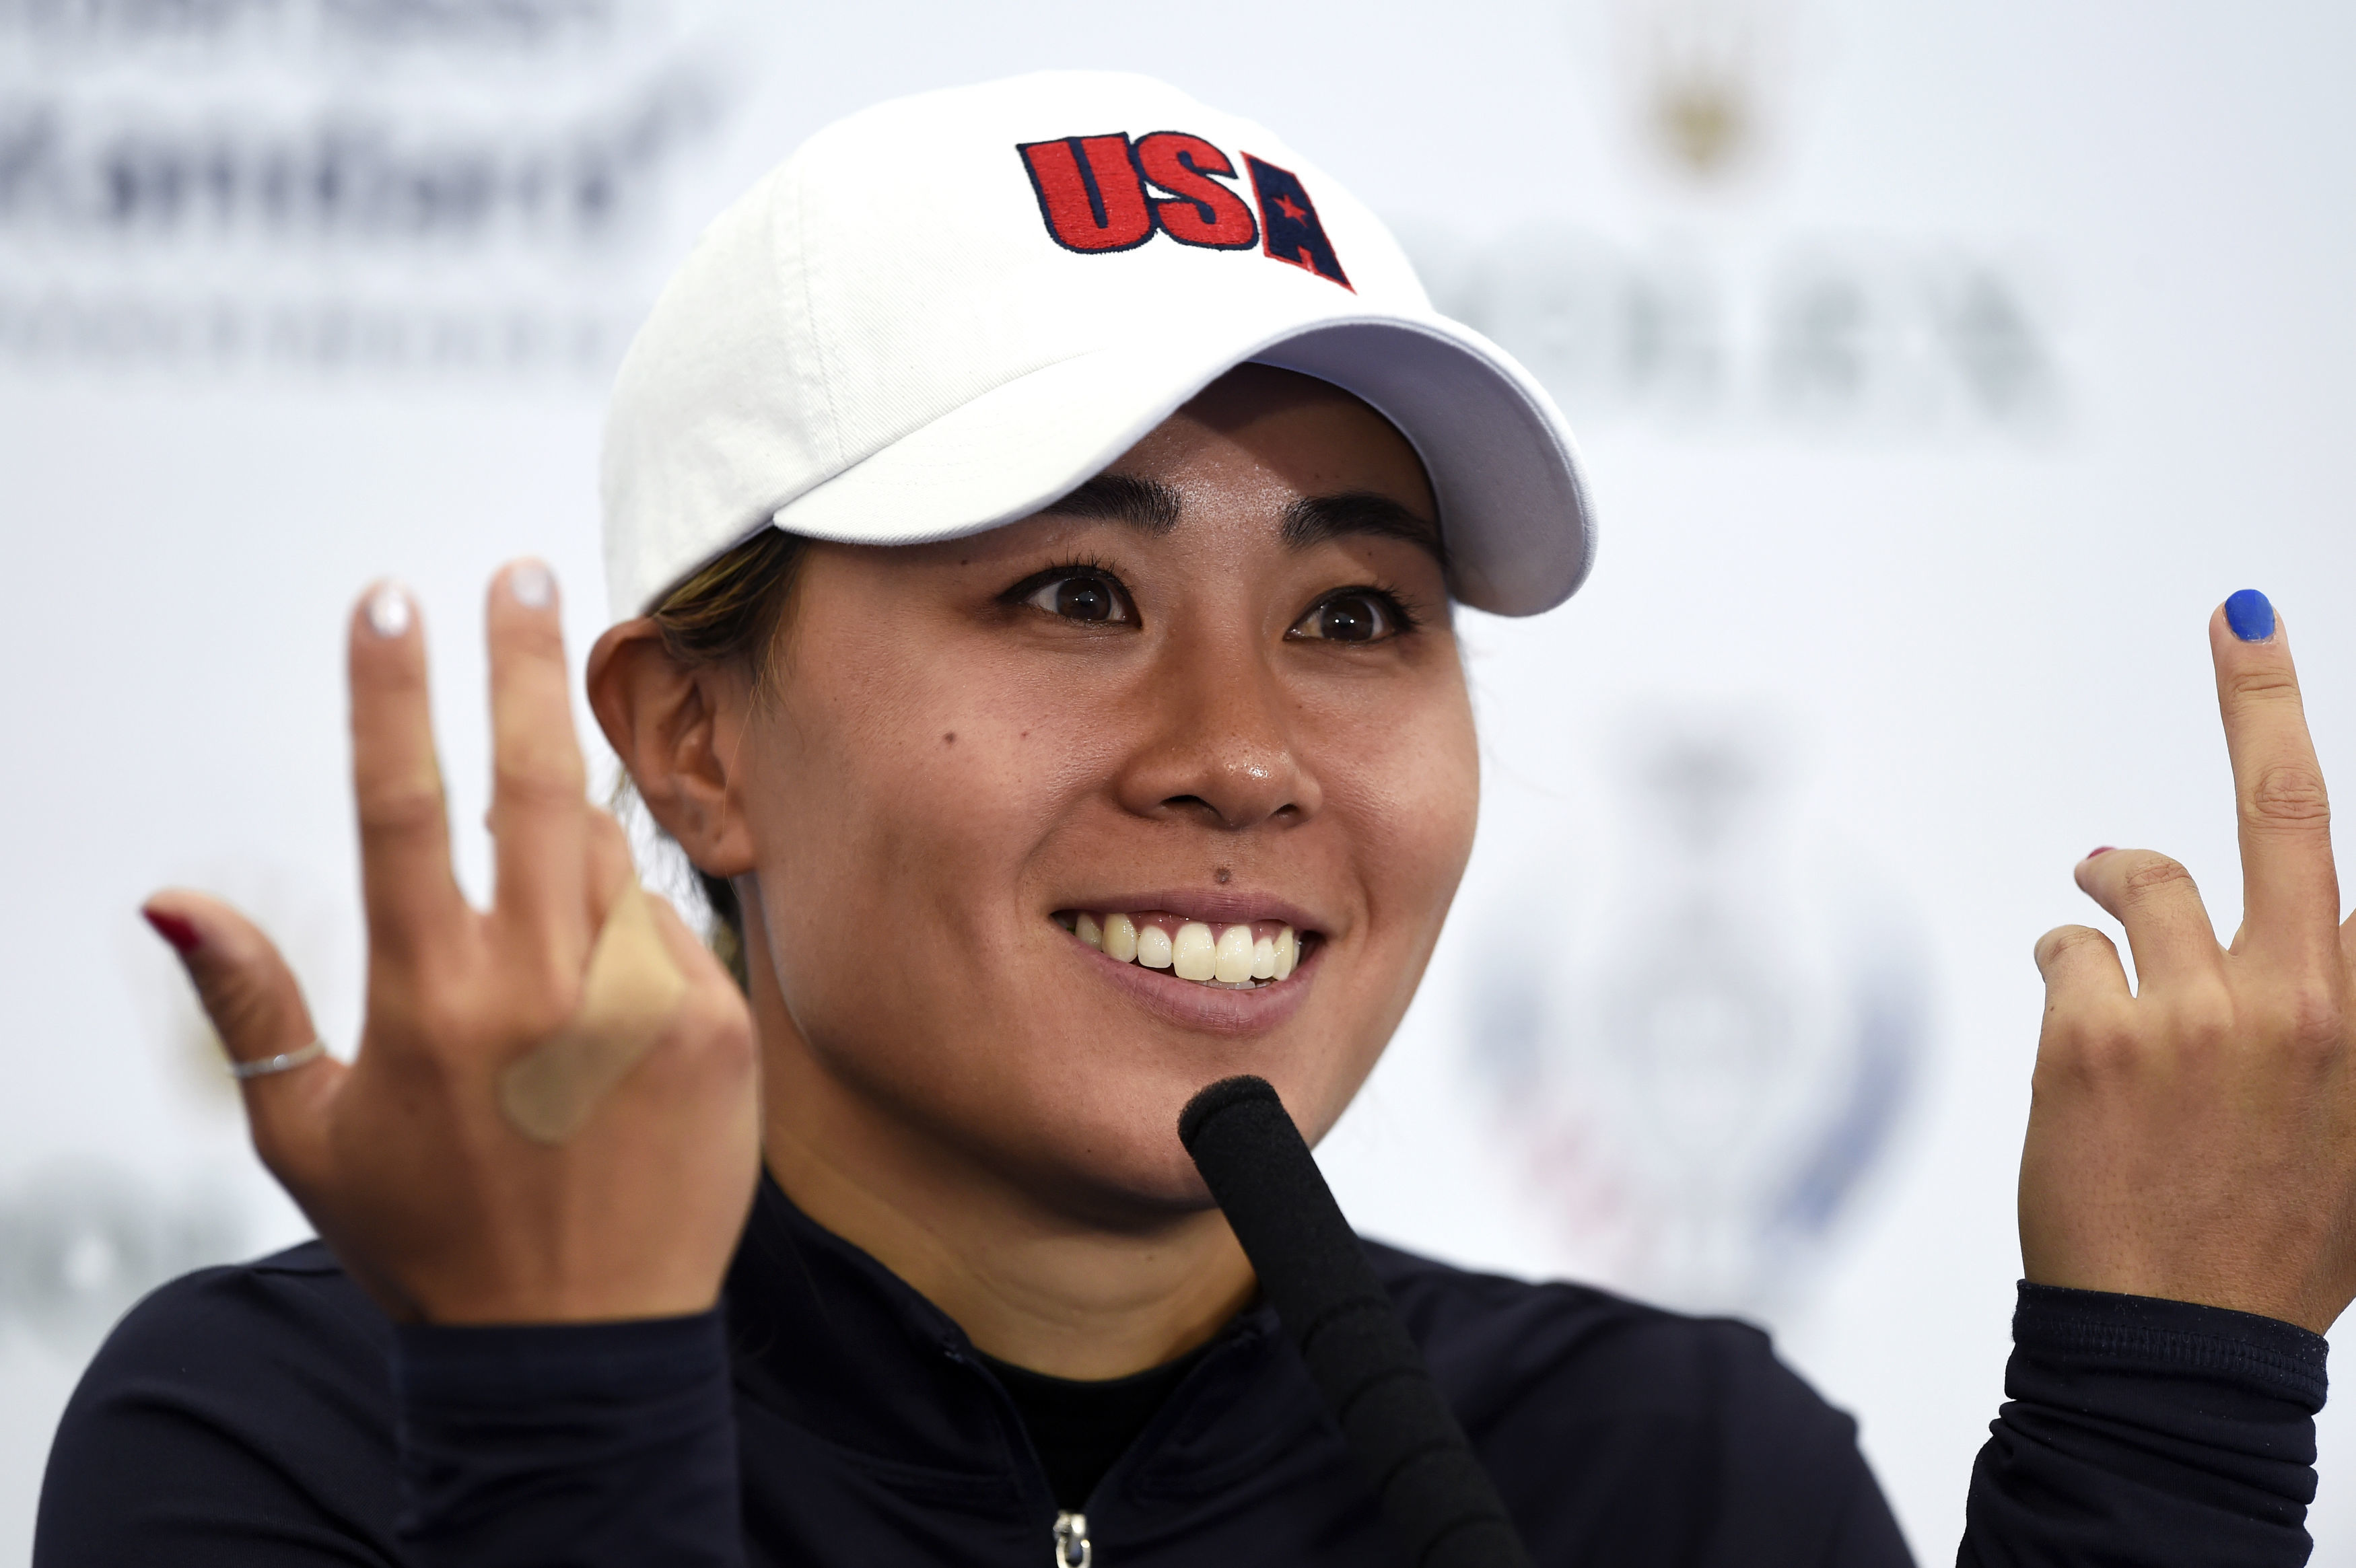 Team USA's Danielle Kang during a press conference on preview day three of the 2019 Solheim Cup at Gleneagles Golf Club.